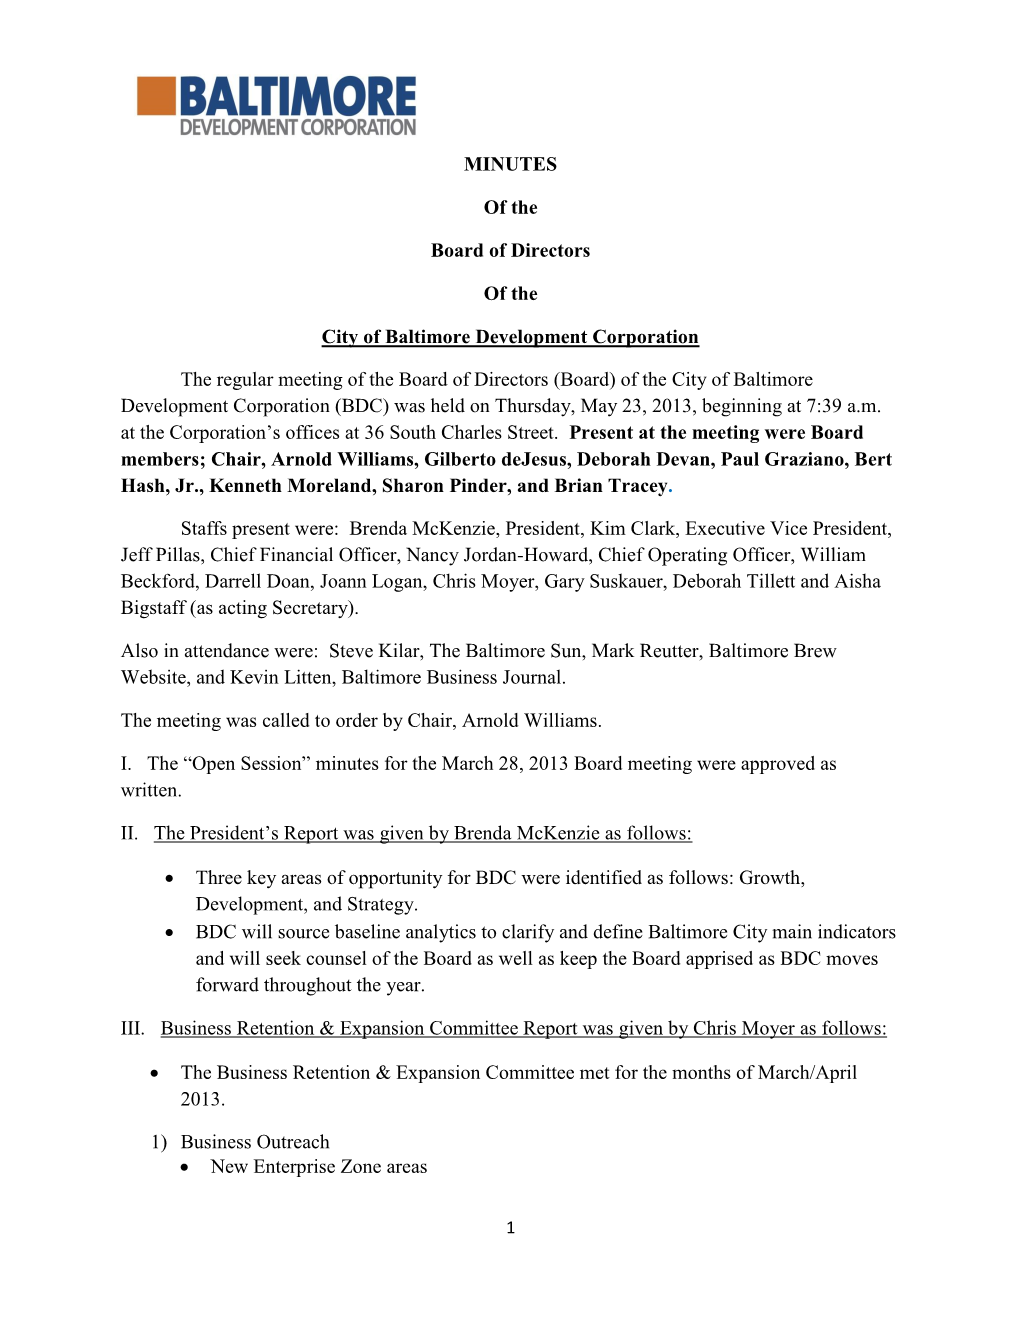 MINUTES of the Board of Directors of the City of Baltimore Development